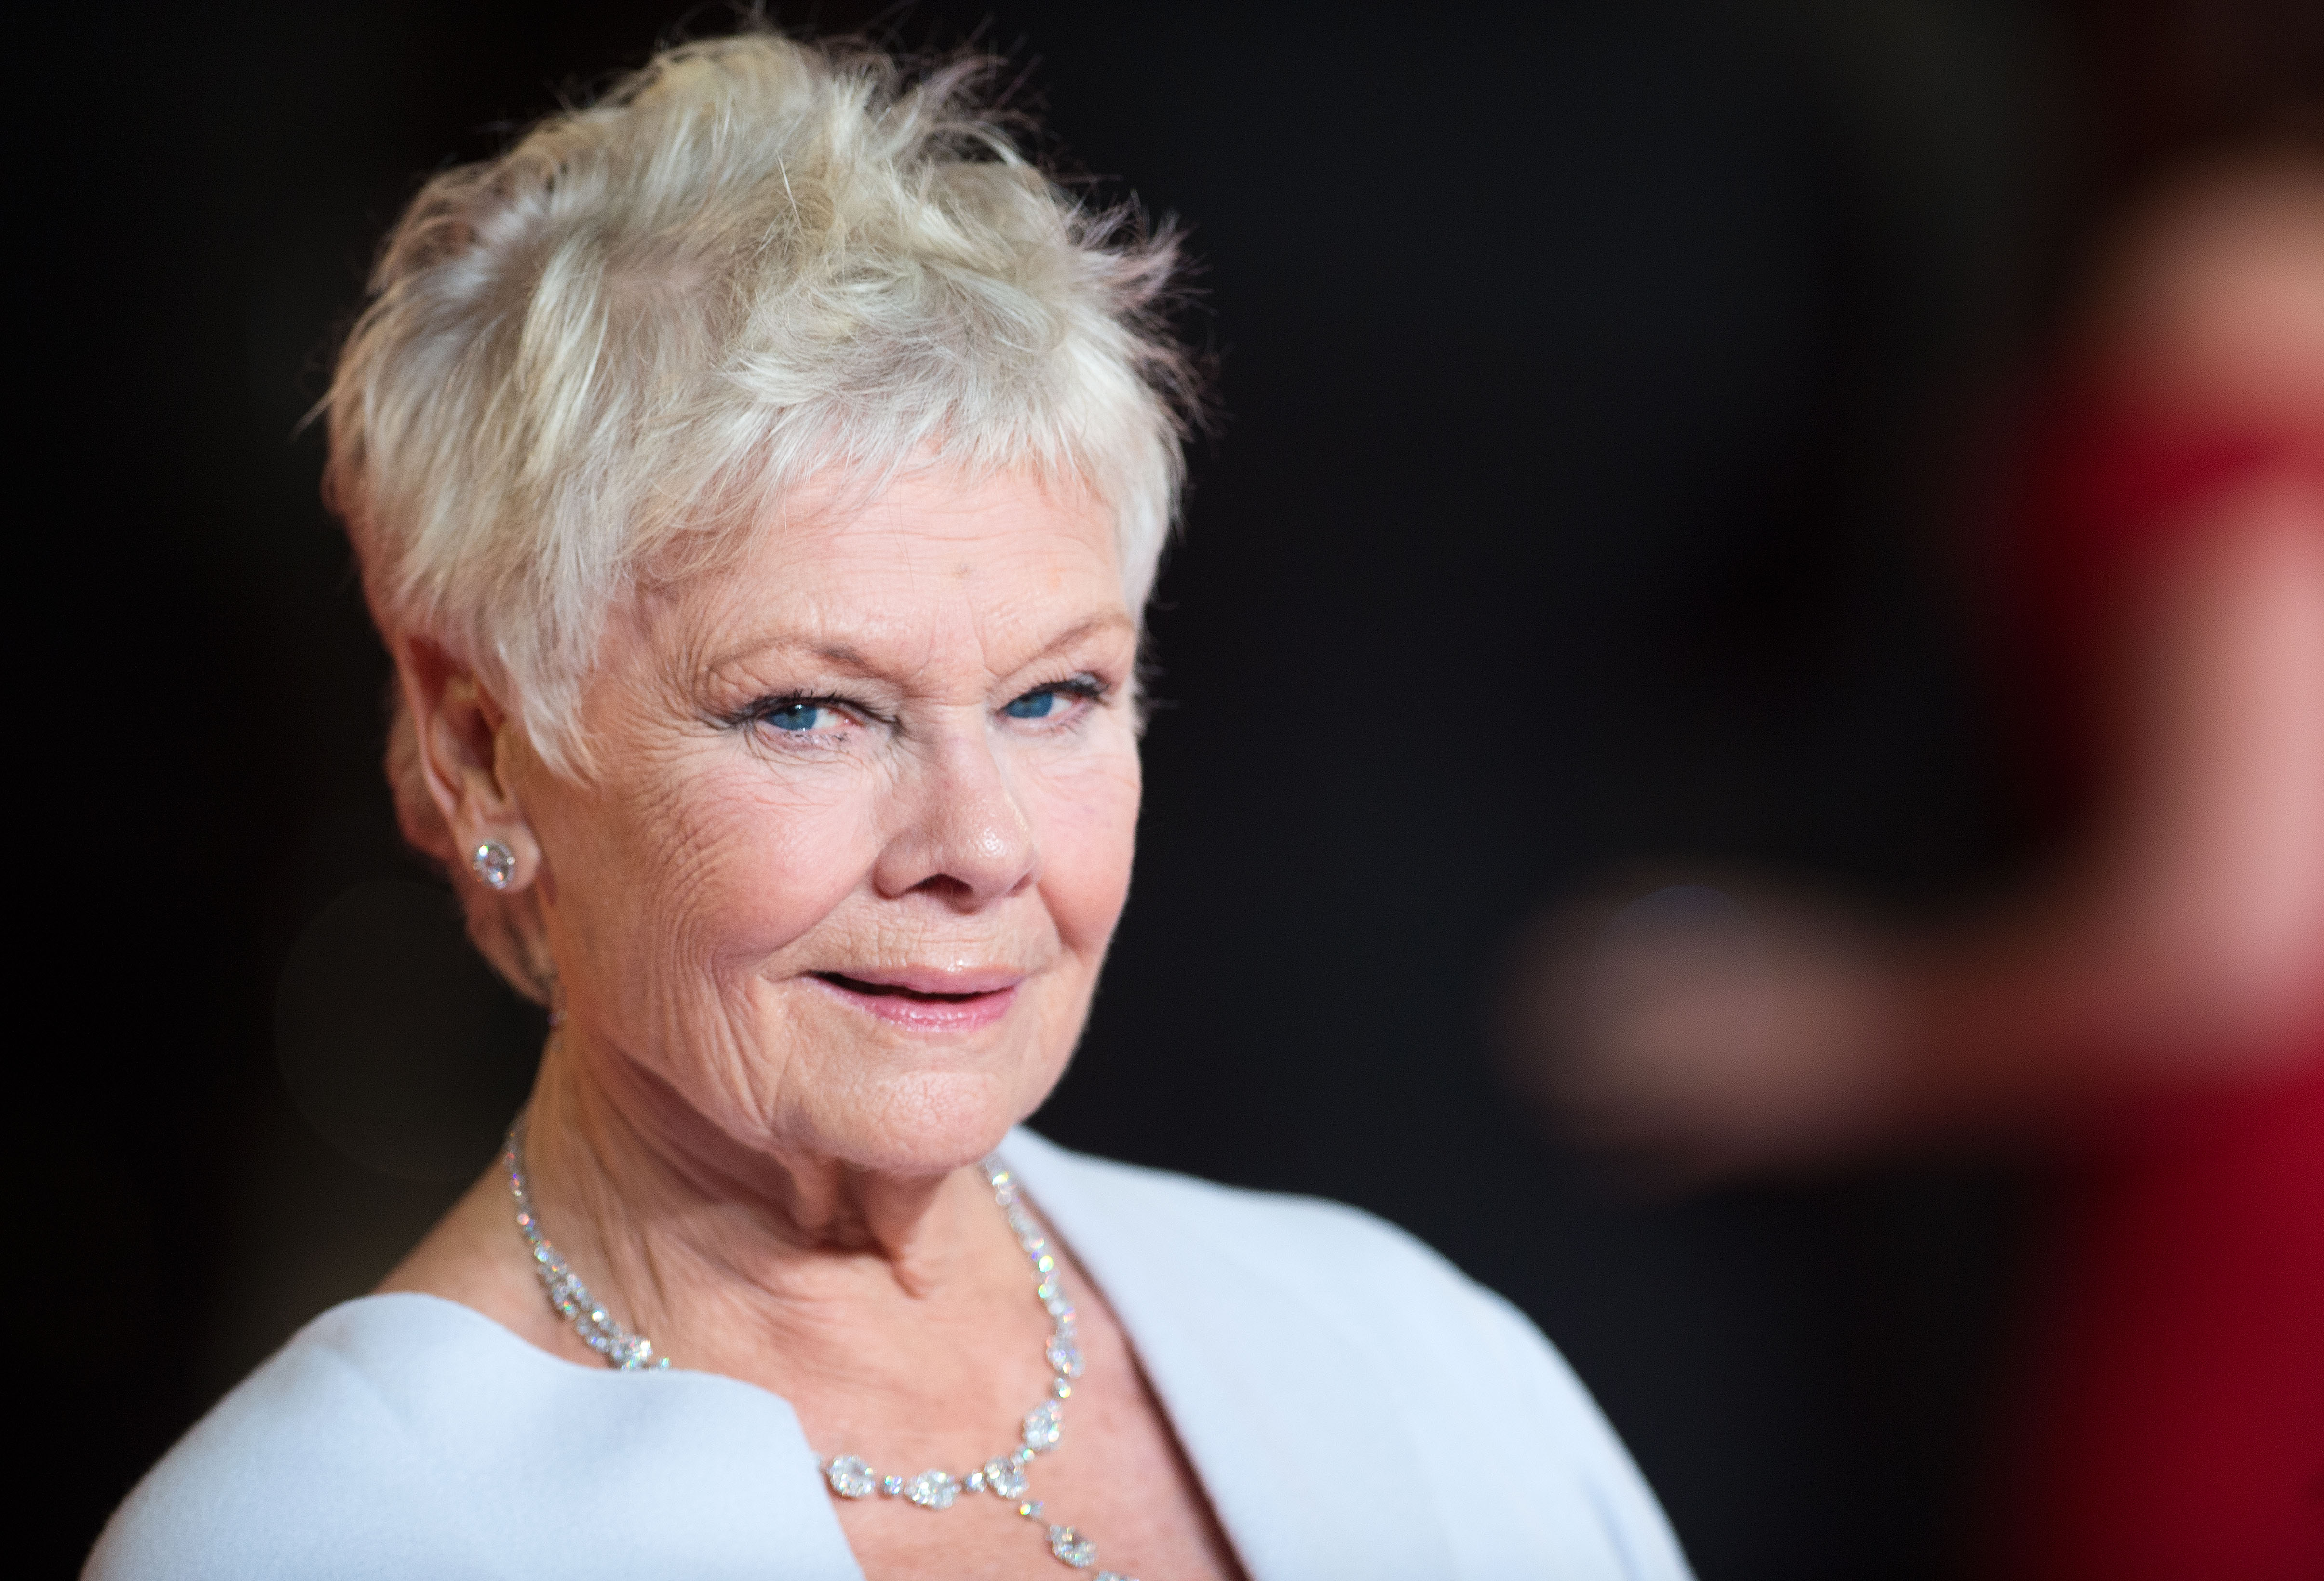 Dame Judi Dench am 23. Oktober 2012 in London, England | Quelle: Getty Images